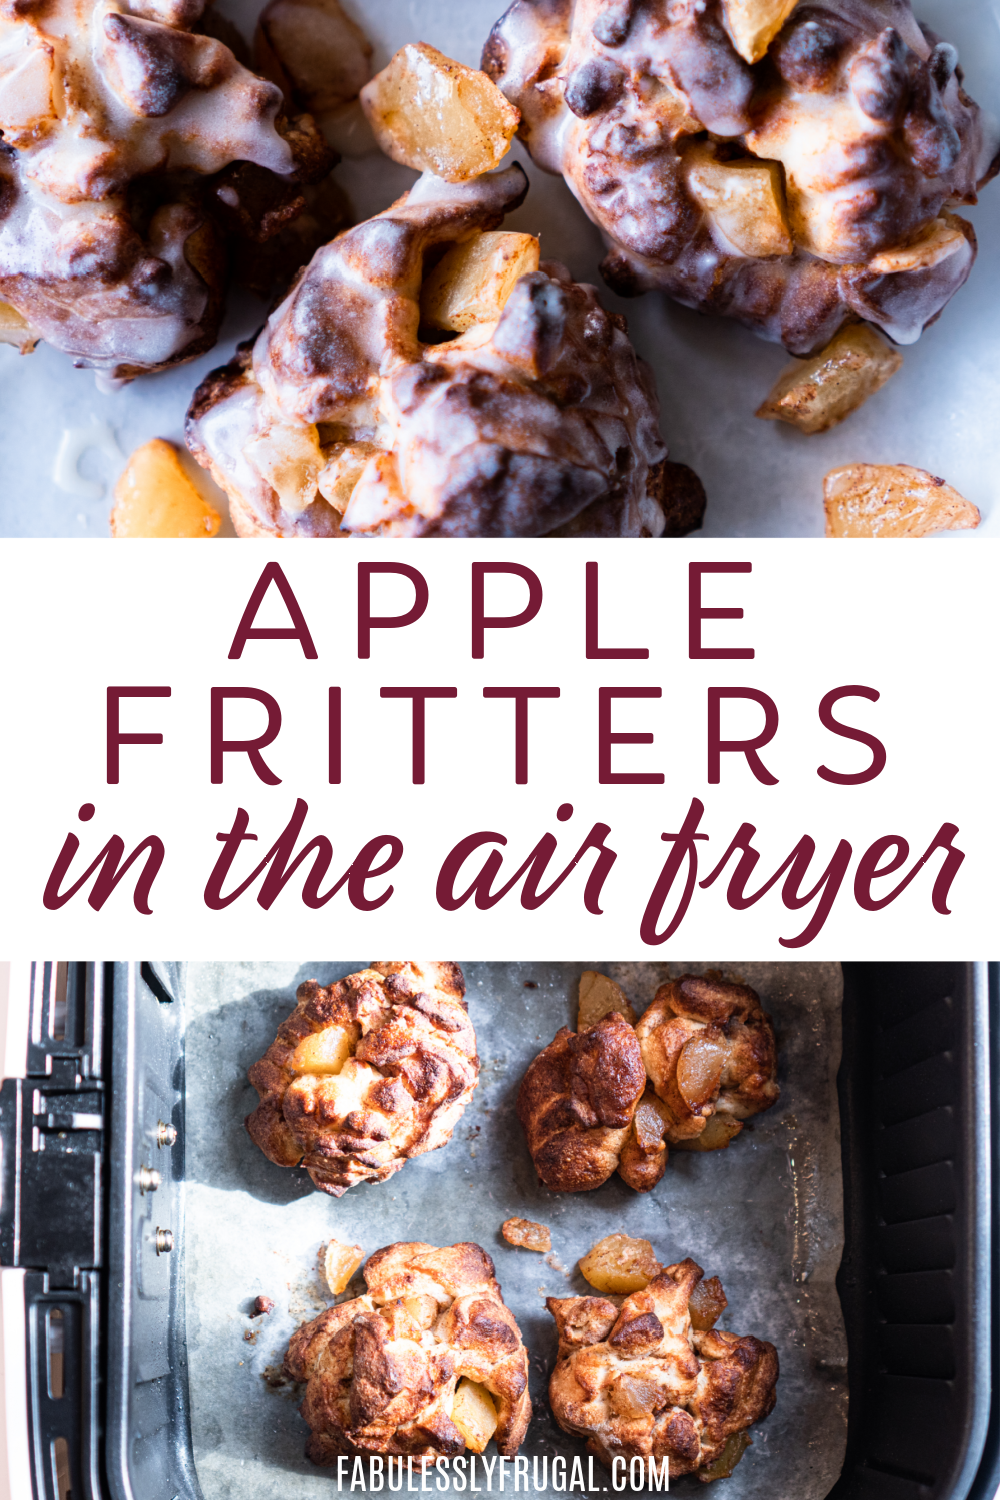 You only need 3 ingredients to make these easy apple fritters in the air fryer. You and everyone will fall in love with this fun air fryer recipe!